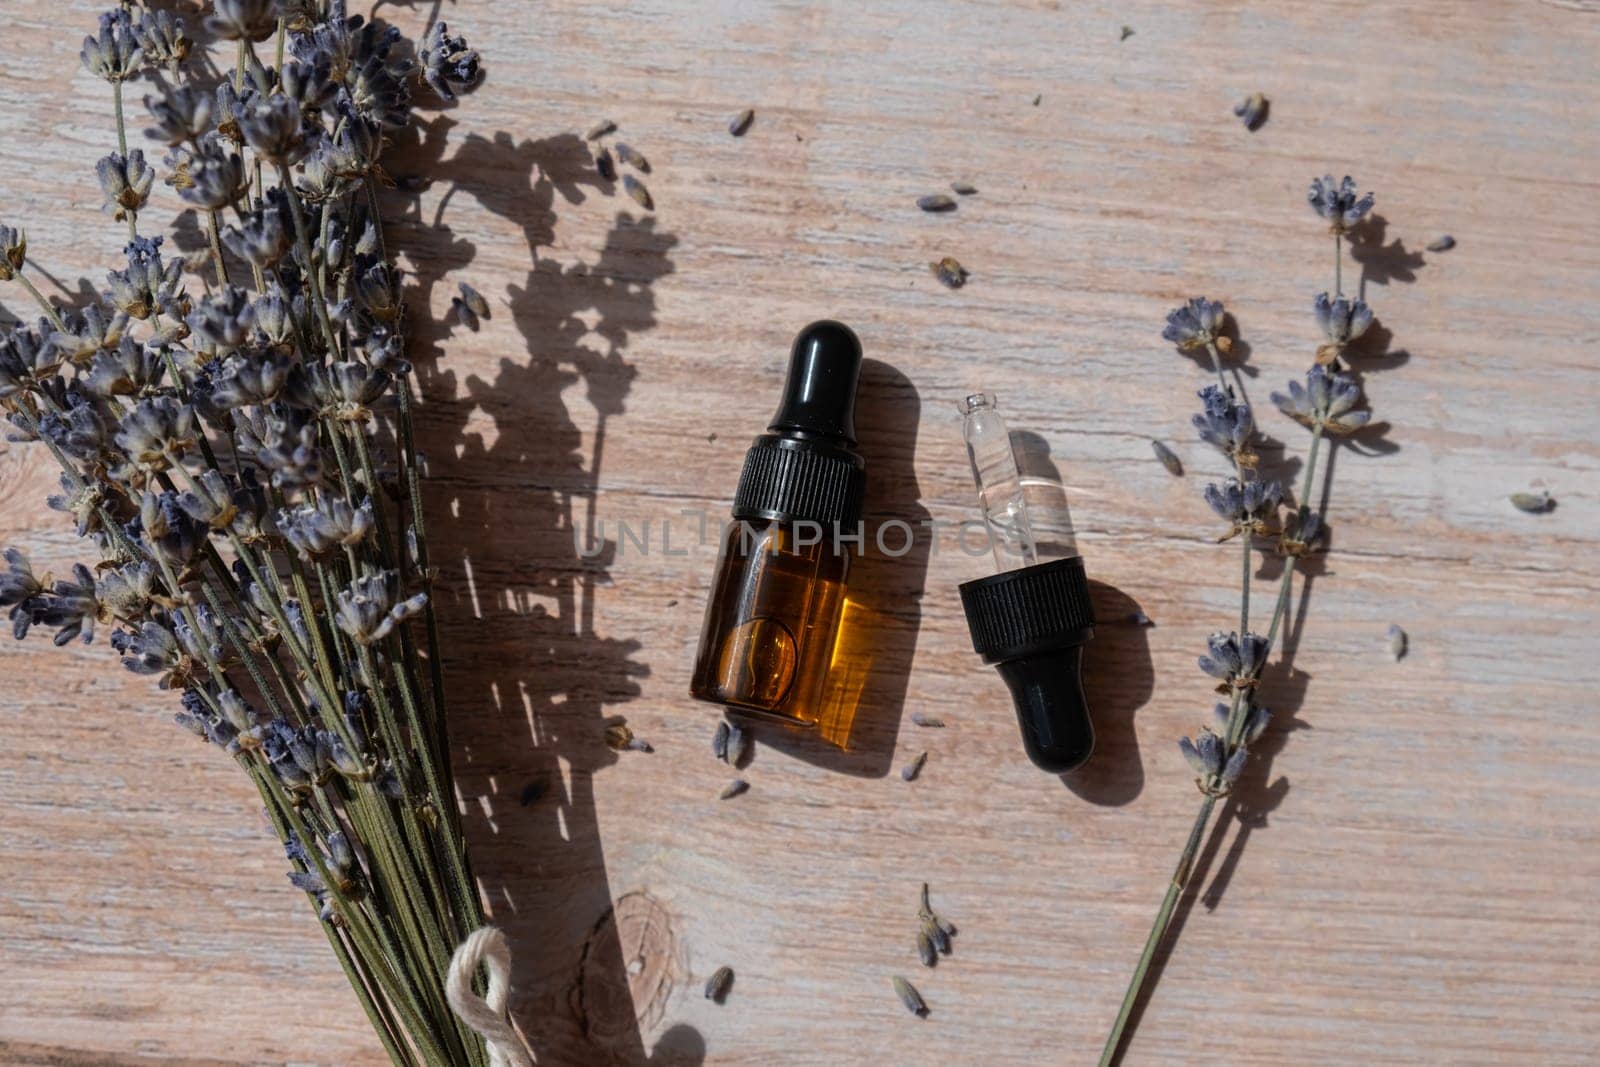 Lavender flowers with dropper glass bottle of essential oil. Concept of alternative medicine. Herbal natural detox treatment. Stress relief calming mental health products. Sustainable wellbeing